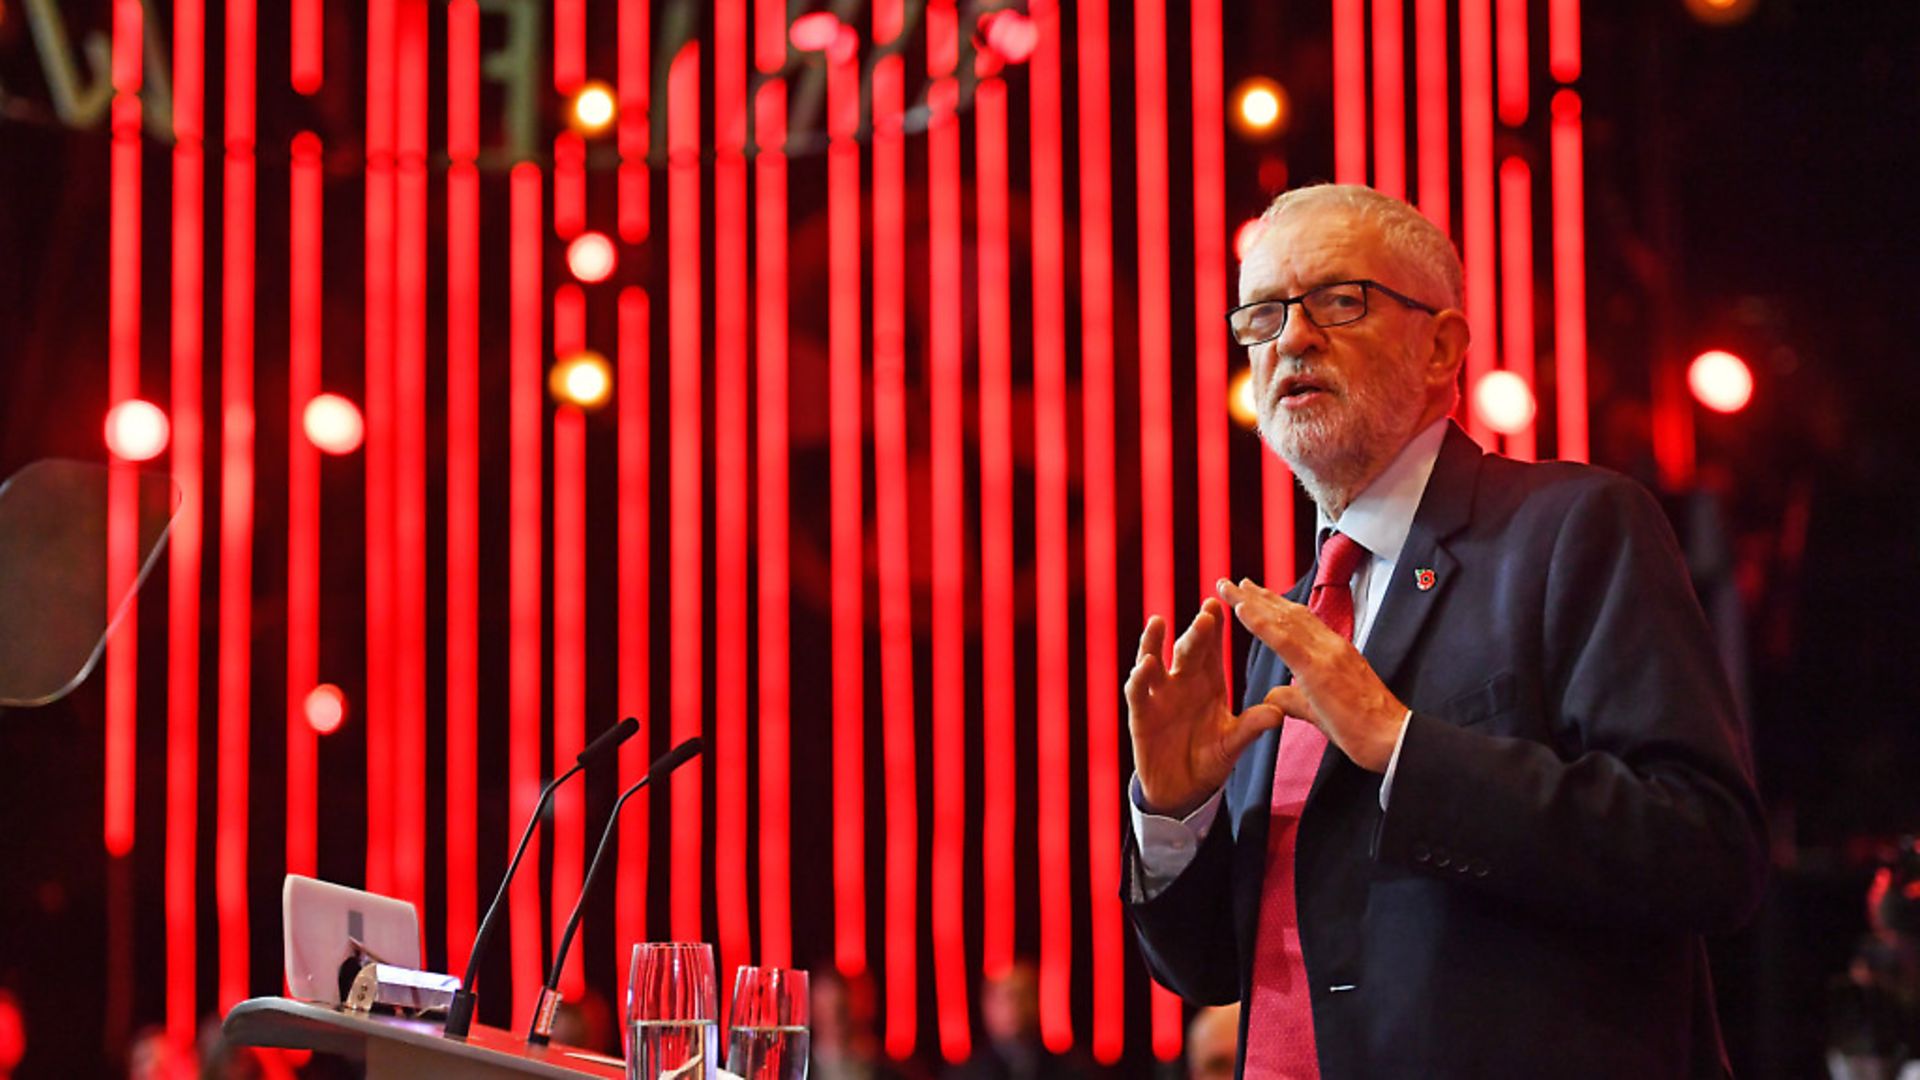 Labour Party leader Jeremy Corbyn speaks to supporters. Photograph: Jacob King/PA. - Credit: PA Wire/PA Images